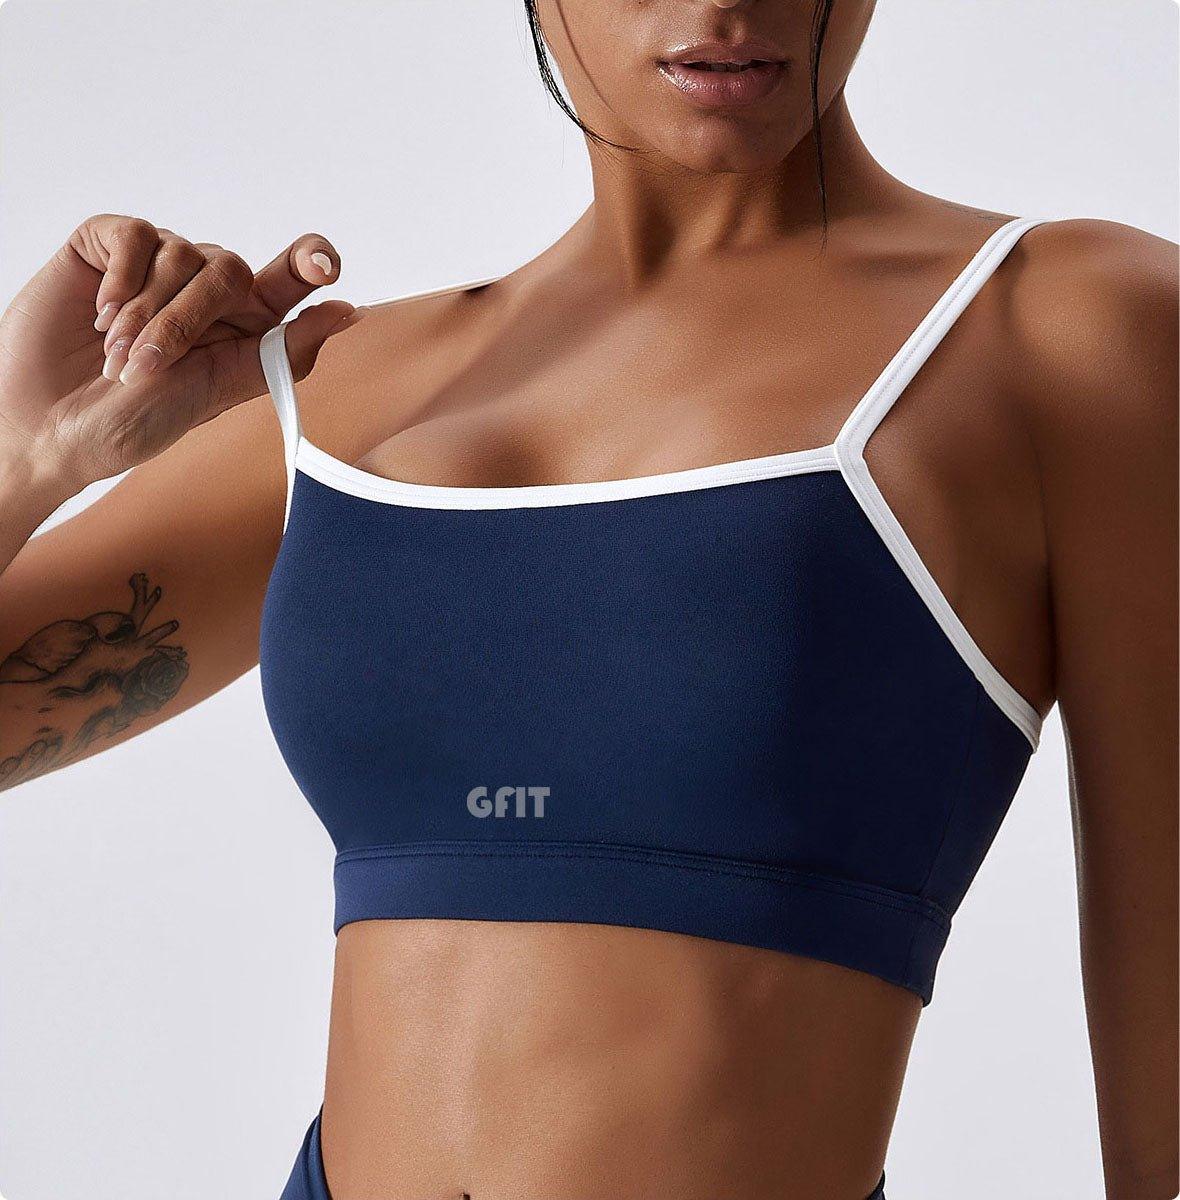 GFIT® Splicing and Contrasting colors Gym Vest For Women - GFIT SPORTS